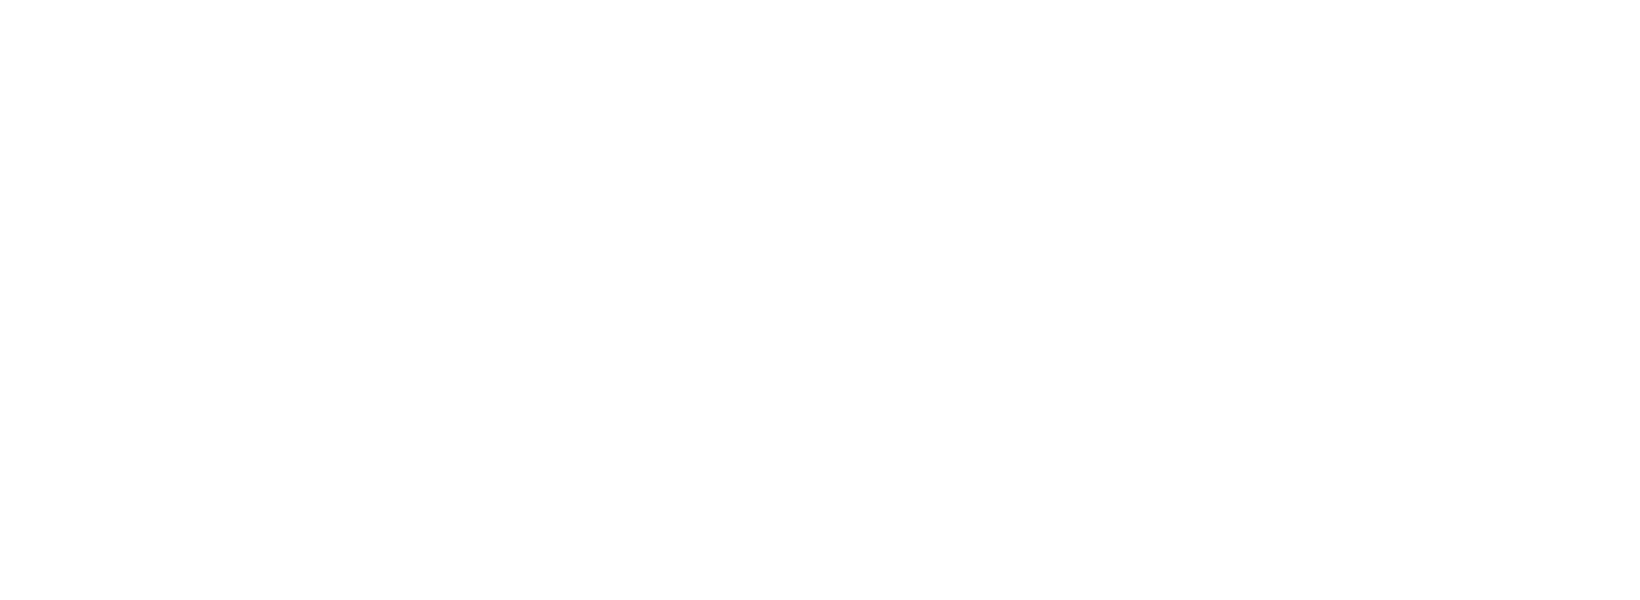 Prime Power Solutions white